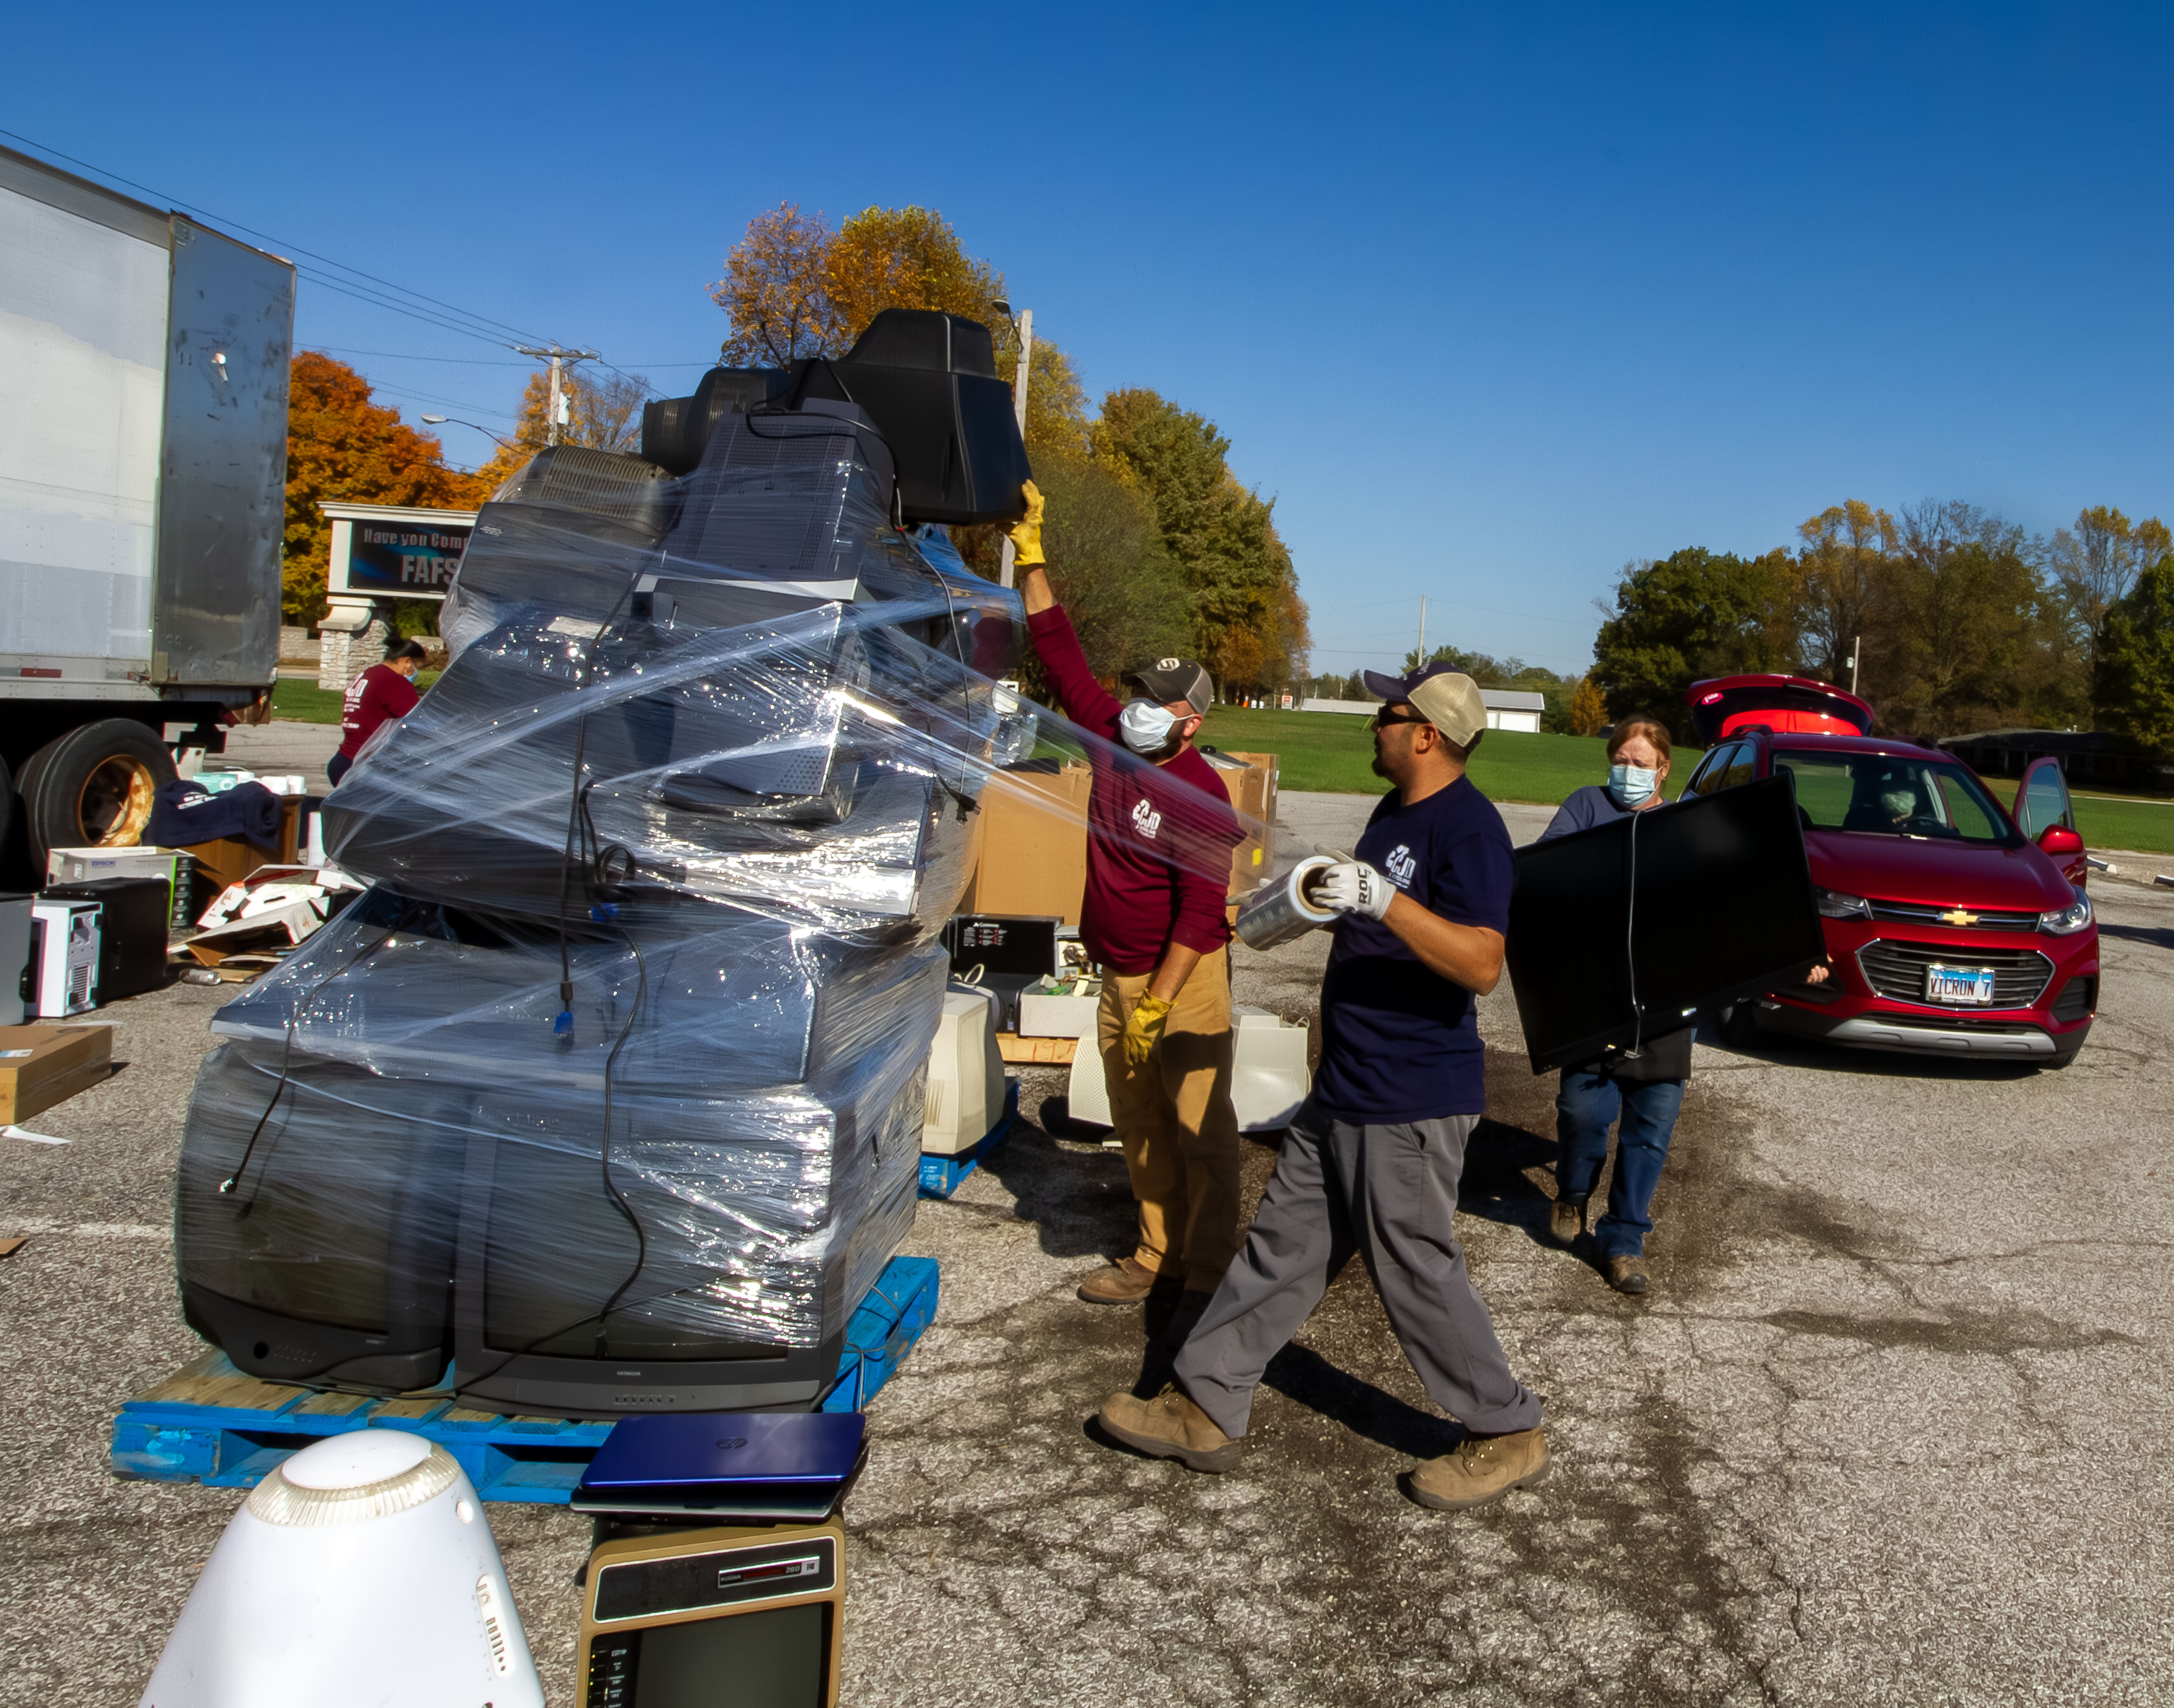 An e-Waste Drive will be held in L&C’s Tolle Lane parking lot on Nov. 10 and 11. Photo by Jan Dona, L&C Marketing/PR.